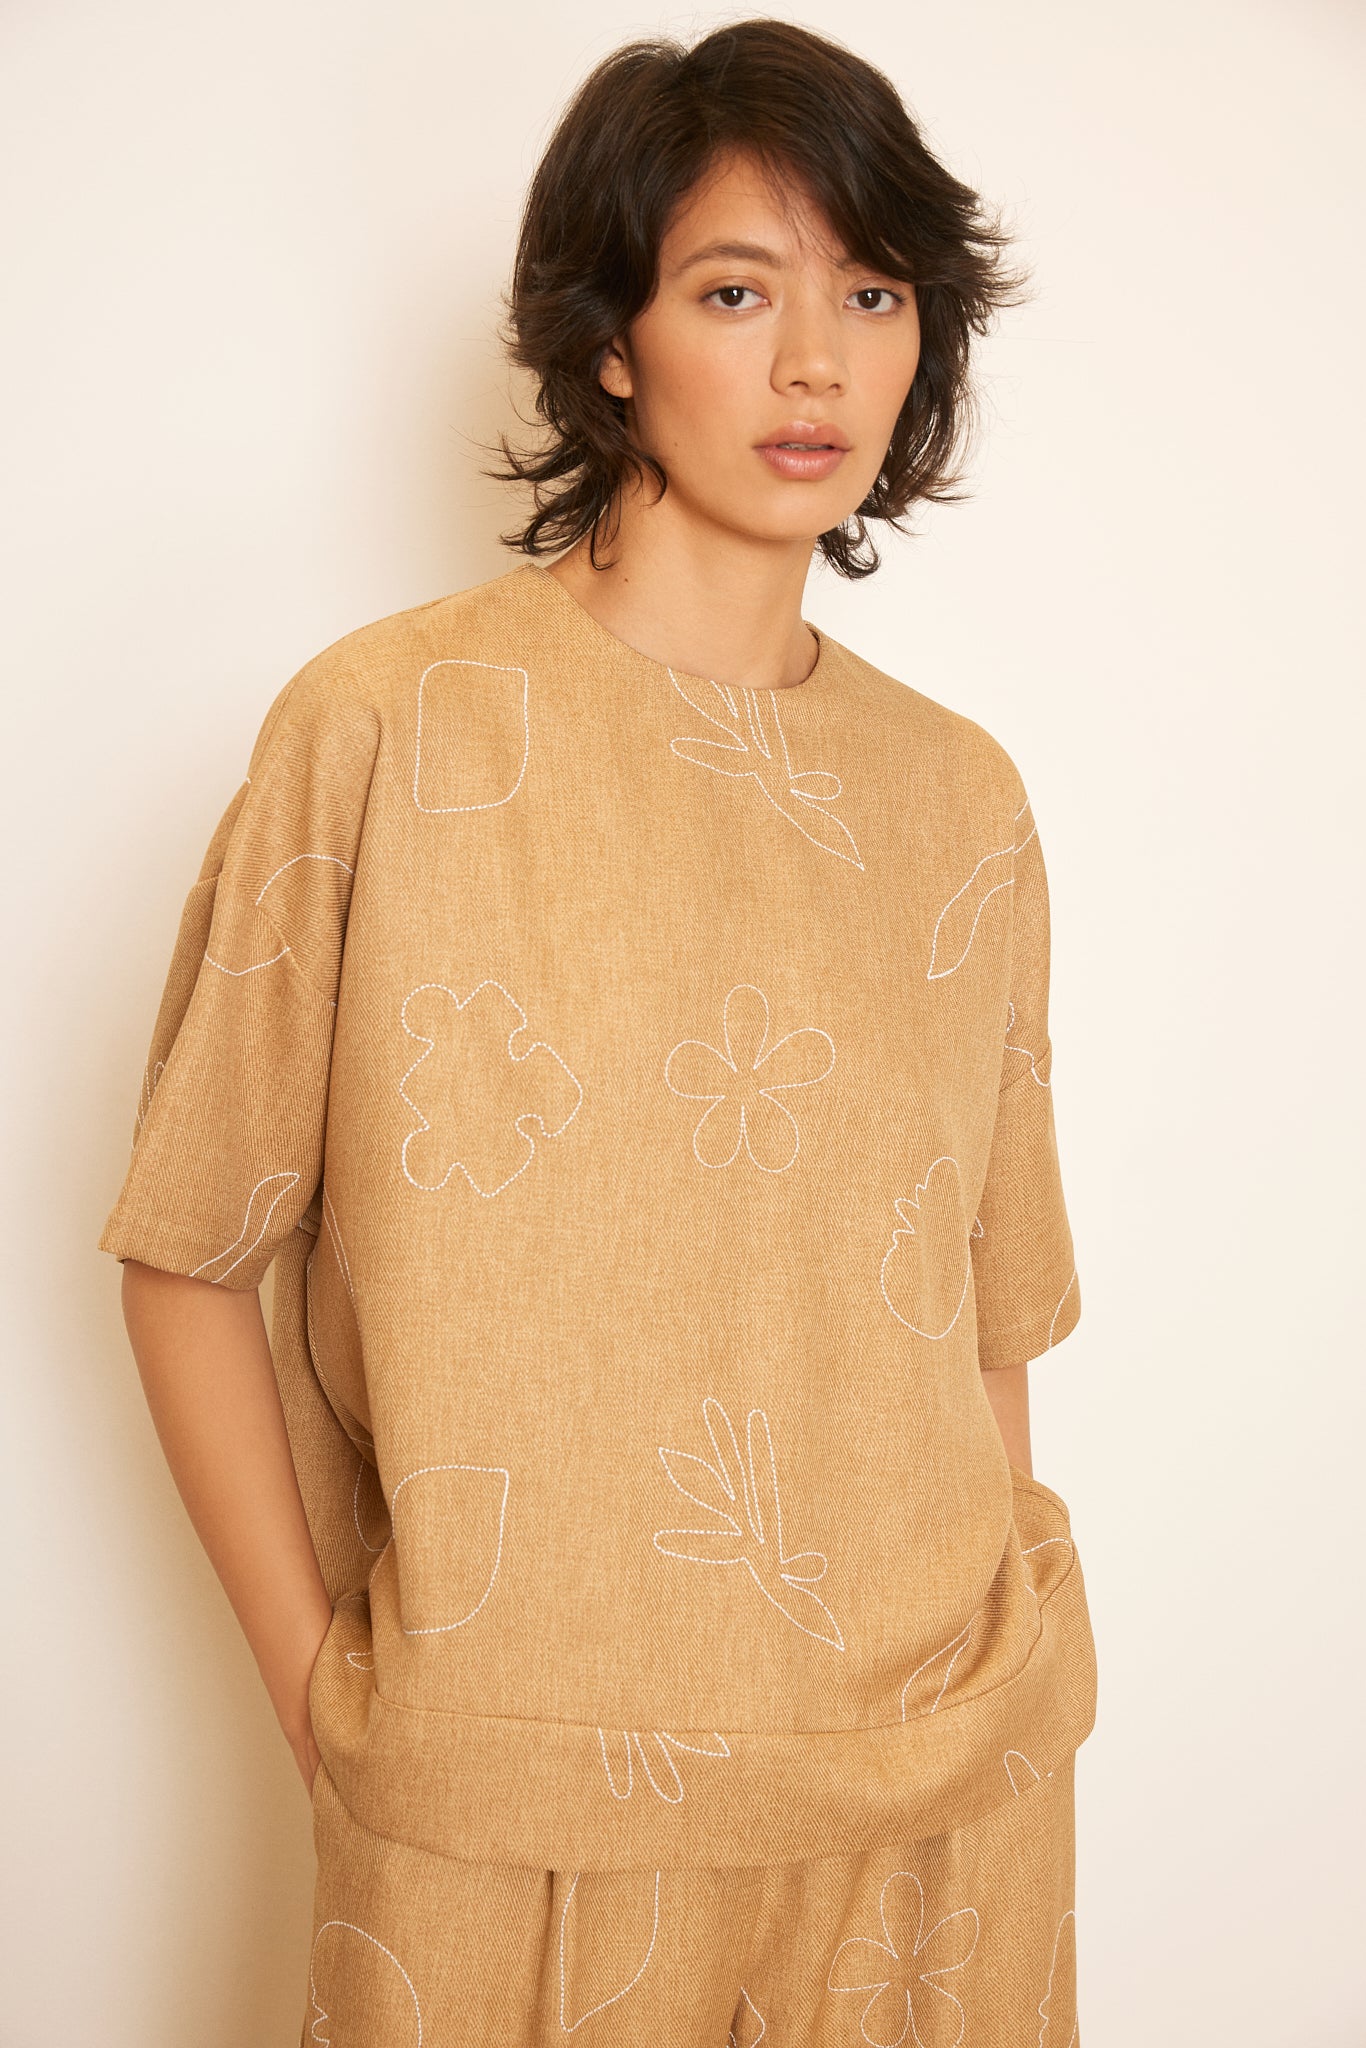 Kilyos Embroidered Top